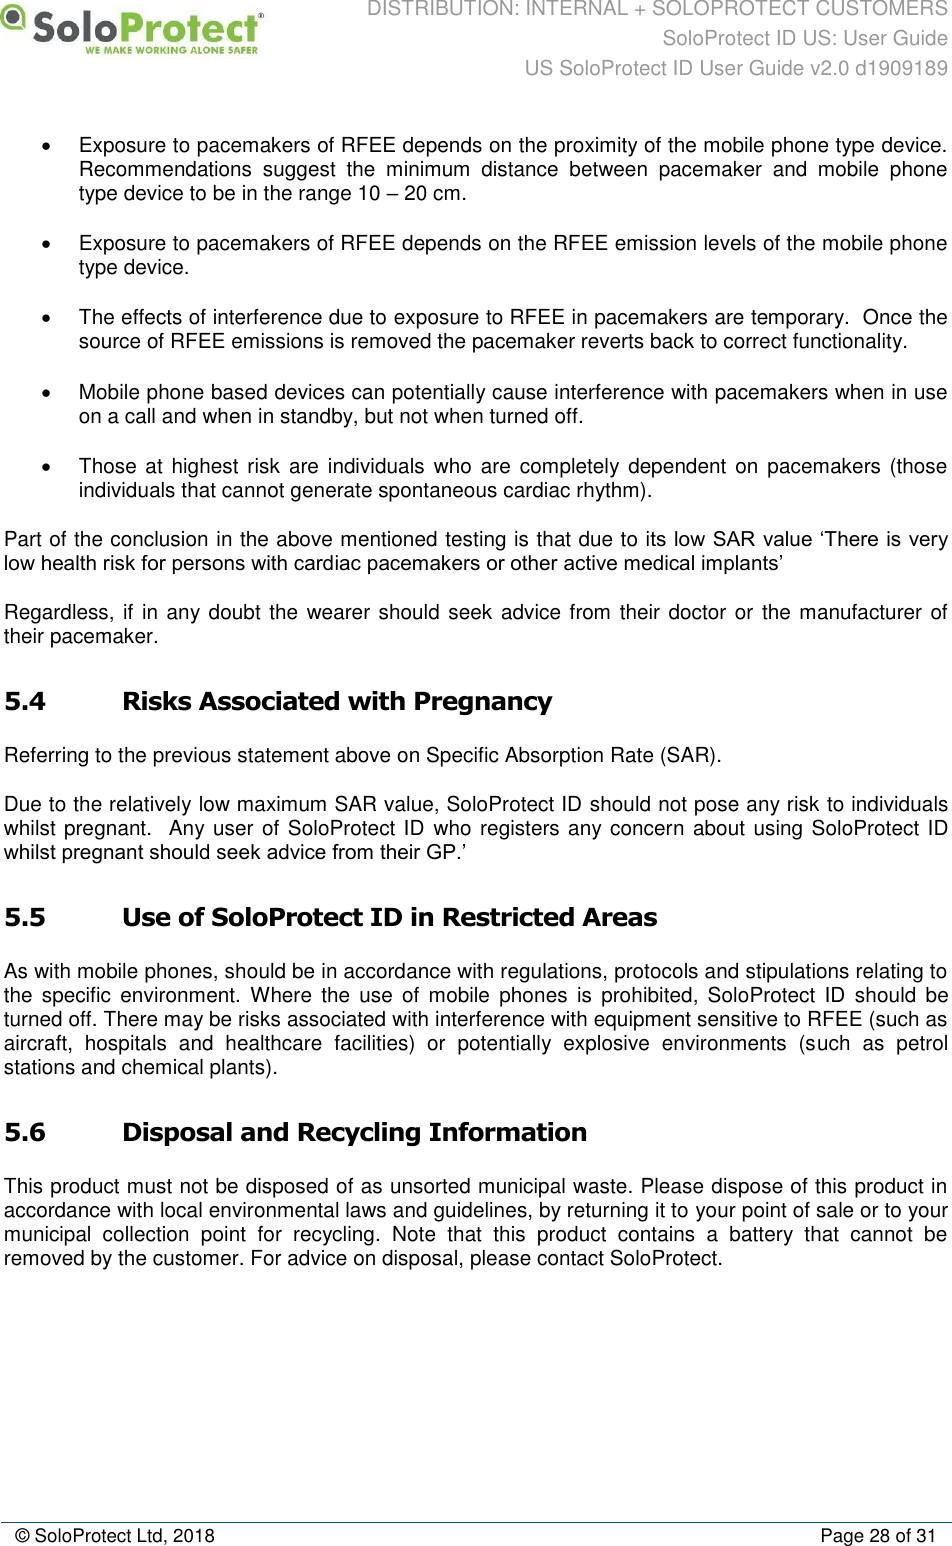 DISTRIBUTION: INTERNAL + SOLOPROTECT CUSTOMERS SoloProtect ID US: User Guide US SoloProtect ID User Guide v2.0 d1909189  © SoloProtect Ltd, 2018  Page 28 of 31 •  Exposure to pacemakers of RFEE depends on the proximity of the mobile phone type device.  Recommendations  suggest  the  minimum  distance  between  pacemaker  and  mobile  phone type device to be in the range 10 – 20 cm. •  Exposure to pacemakers of RFEE depends on the RFEE emission levels of the mobile phone type device. •  The effects of interference due to exposure to RFEE in pacemakers are temporary.  Once the source of RFEE emissions is removed the pacemaker reverts back to correct functionality. •  Mobile phone based devices can potentially cause interference with pacemakers when in use on a call and when in standby, but not when turned off. •  Those at highest  risk  are individuals who are completely dependent on pacemakers (those individuals that cannot generate spontaneous cardiac rhythm). Part of the conclusion in the above mentioned testing is that due to its low SAR value ‘There is very low health risk for persons with cardiac pacemakers or other active medical implants’ Regardless, if in any doubt the wearer should seek advice from their doctor  or the manufacturer of their pacemaker. 5.4 Risks Associated with Pregnancy Referring to the previous statement above on Specific Absorption Rate (SAR). Due to the relatively low maximum SAR value, SoloProtect ID should not pose any risk to individuals whilst pregnant.  Any user of SoloProtect ID who registers any concern about using SoloProtect ID whilst pregnant should seek advice from their GP.’ 5.5 Use of SoloProtect ID in Restricted Areas As with mobile phones, should be in accordance with regulations, protocols and stipulations relating to the  specific  environment.  Where  the  use  of  mobile  phones  is  prohibited,  SoloProtect  ID  should  be turned off. There may be risks associated with interference with equipment sensitive to RFEE (such as aircraft,  hospitals  and  healthcare  facilities)  or  potentially  explosive  environments  (such  as  petrol stations and chemical plants). 5.6 Disposal and Recycling Information This product must not be disposed of as unsorted municipal waste. Please dispose of this product in accordance with local environmental laws and guidelines, by returning it to your point of sale or to your municipal  collection  point  for  recycling.  Note  that  this  product  contains  a  battery  that  cannot  be removed by the customer. For advice on disposal, please contact SoloProtect. 